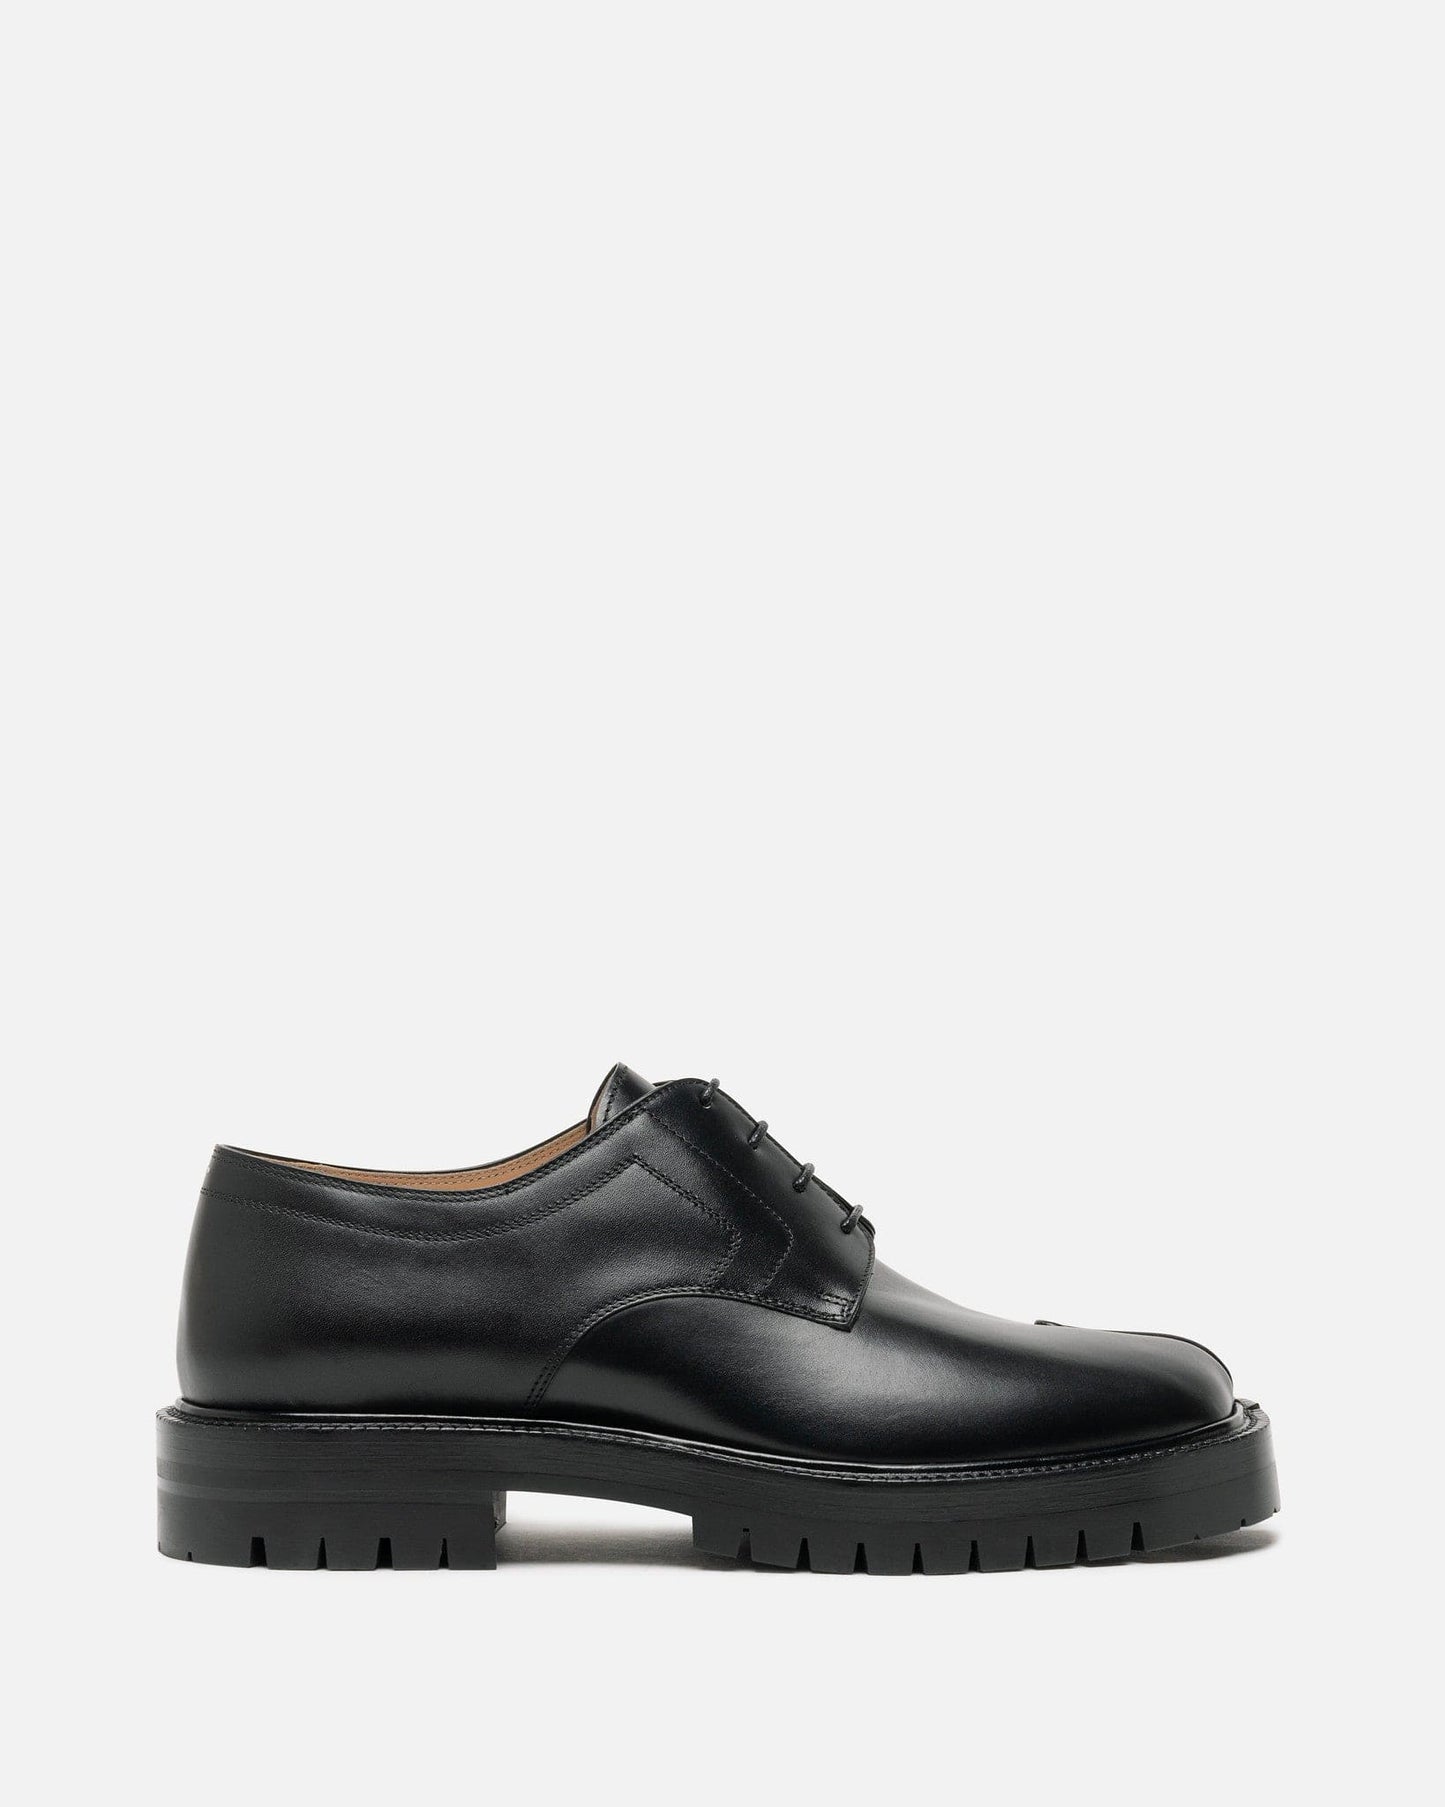 Maison Margiela SOLD OUT Tabi County Lace-Up Shoe in Black